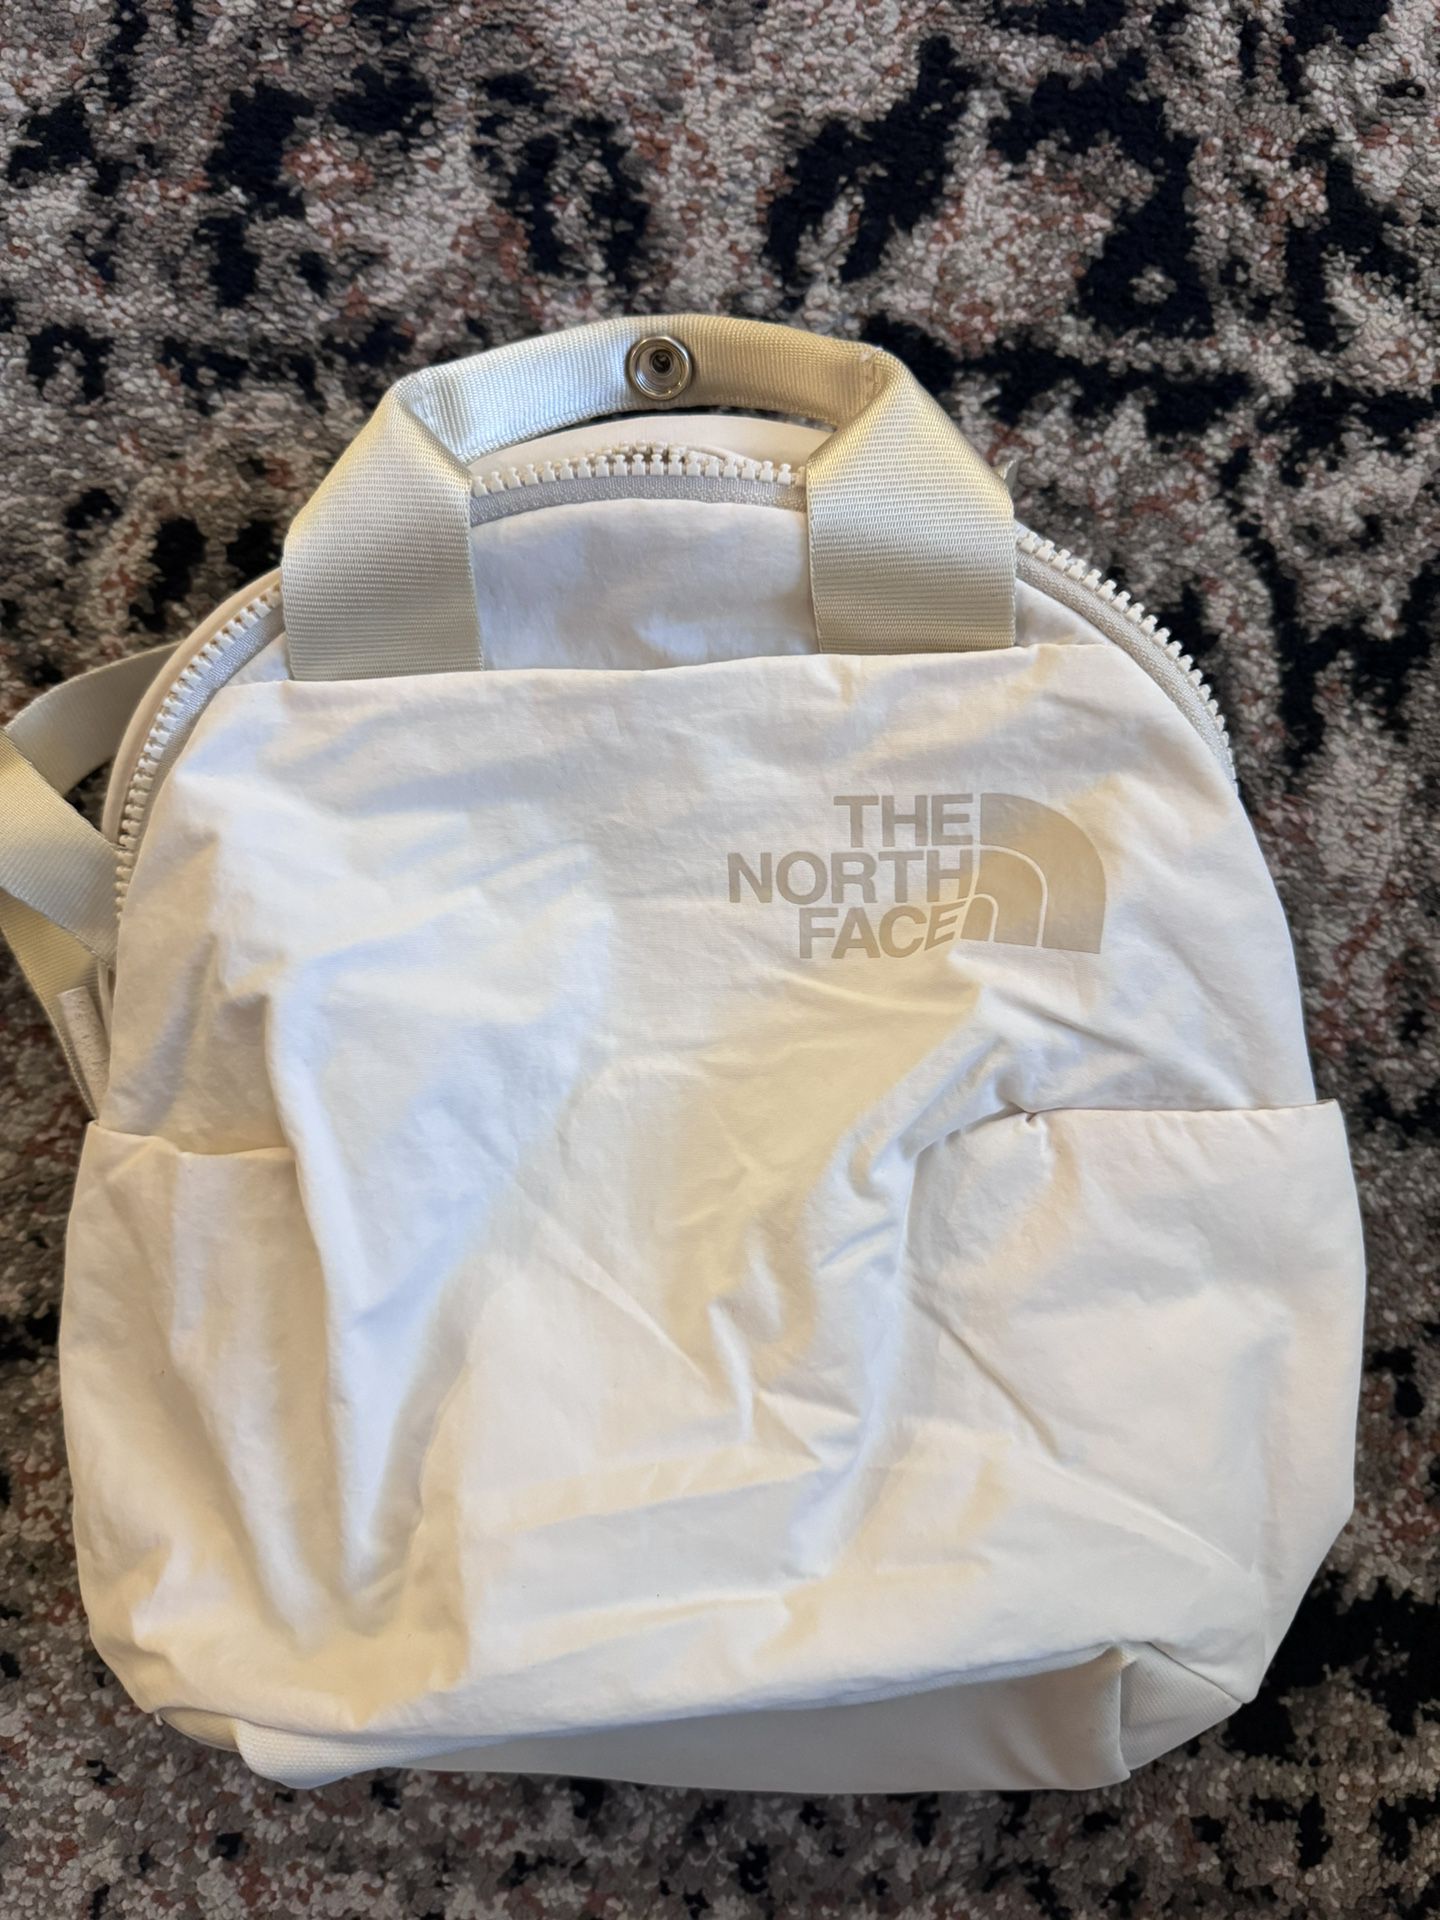 The North Face Mini White Puffy Backpack